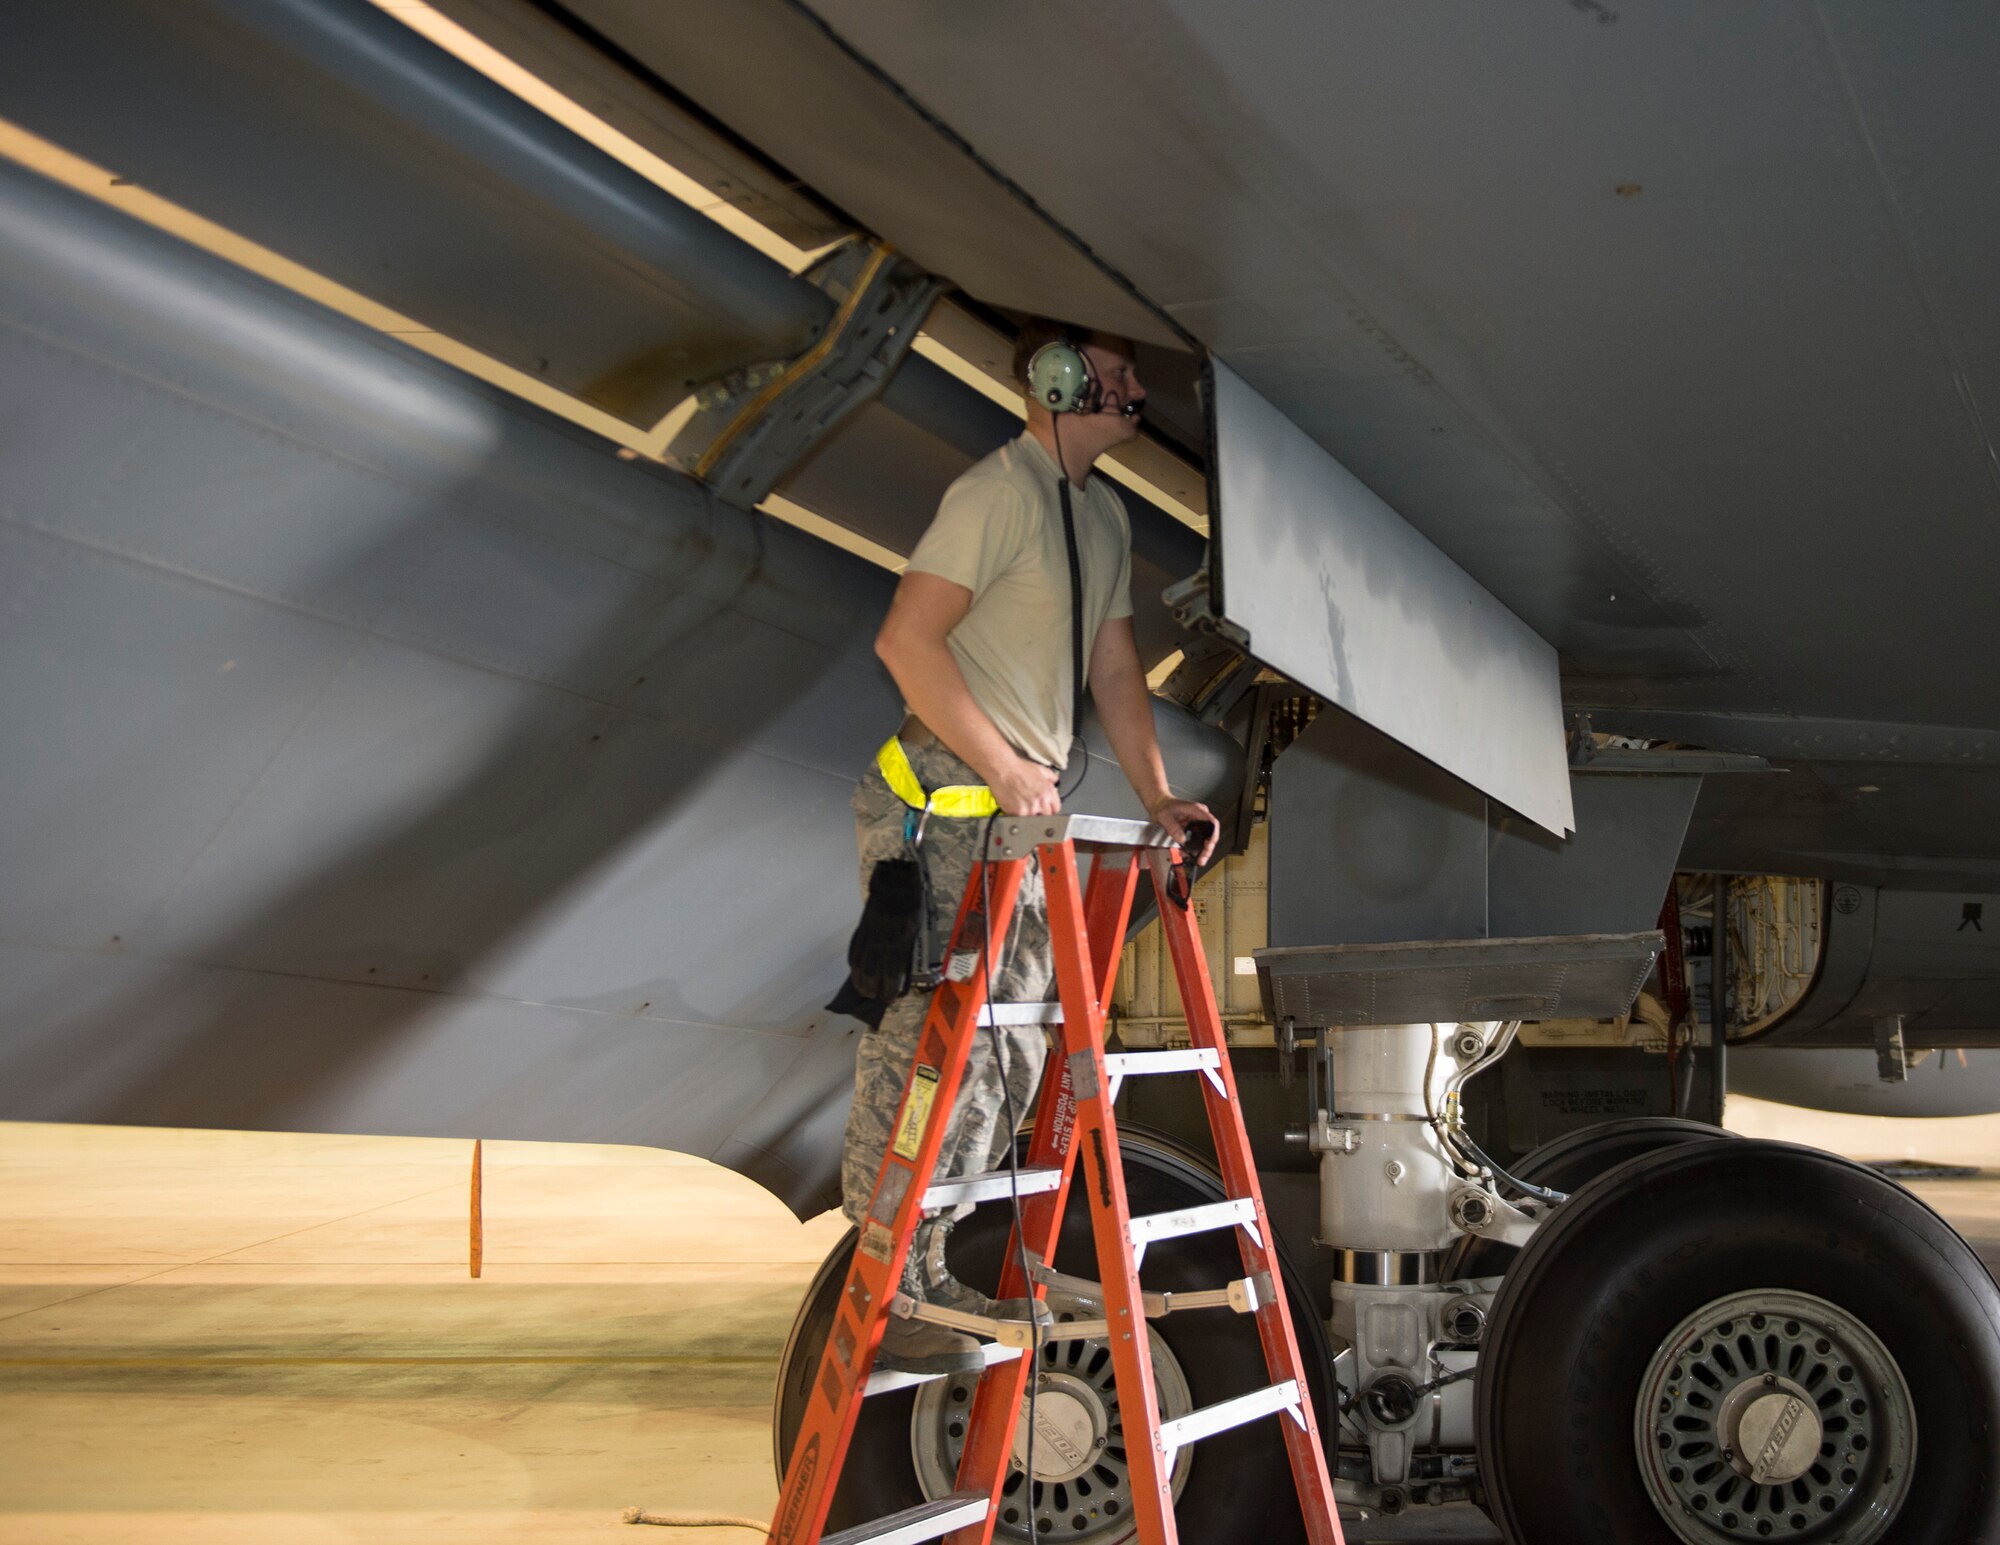 U.S. Air Force Tech. Sgt. Christian Runyon, fuel systems technician with the 379th Expeditionary Maintenance Squadron, watches the gravity transfer valve on a KC-135 Stratotanker at Al Udeid Air Base, Qatar, April 24, 2017. Runyon is in the process of a gravity transfer valve operational check and is responsible for diagnosing and repairing any malfunctions before the aircraft takes flight. (U.S. Air Force photo by Tech. Sgt. Amy M. Lovgren)